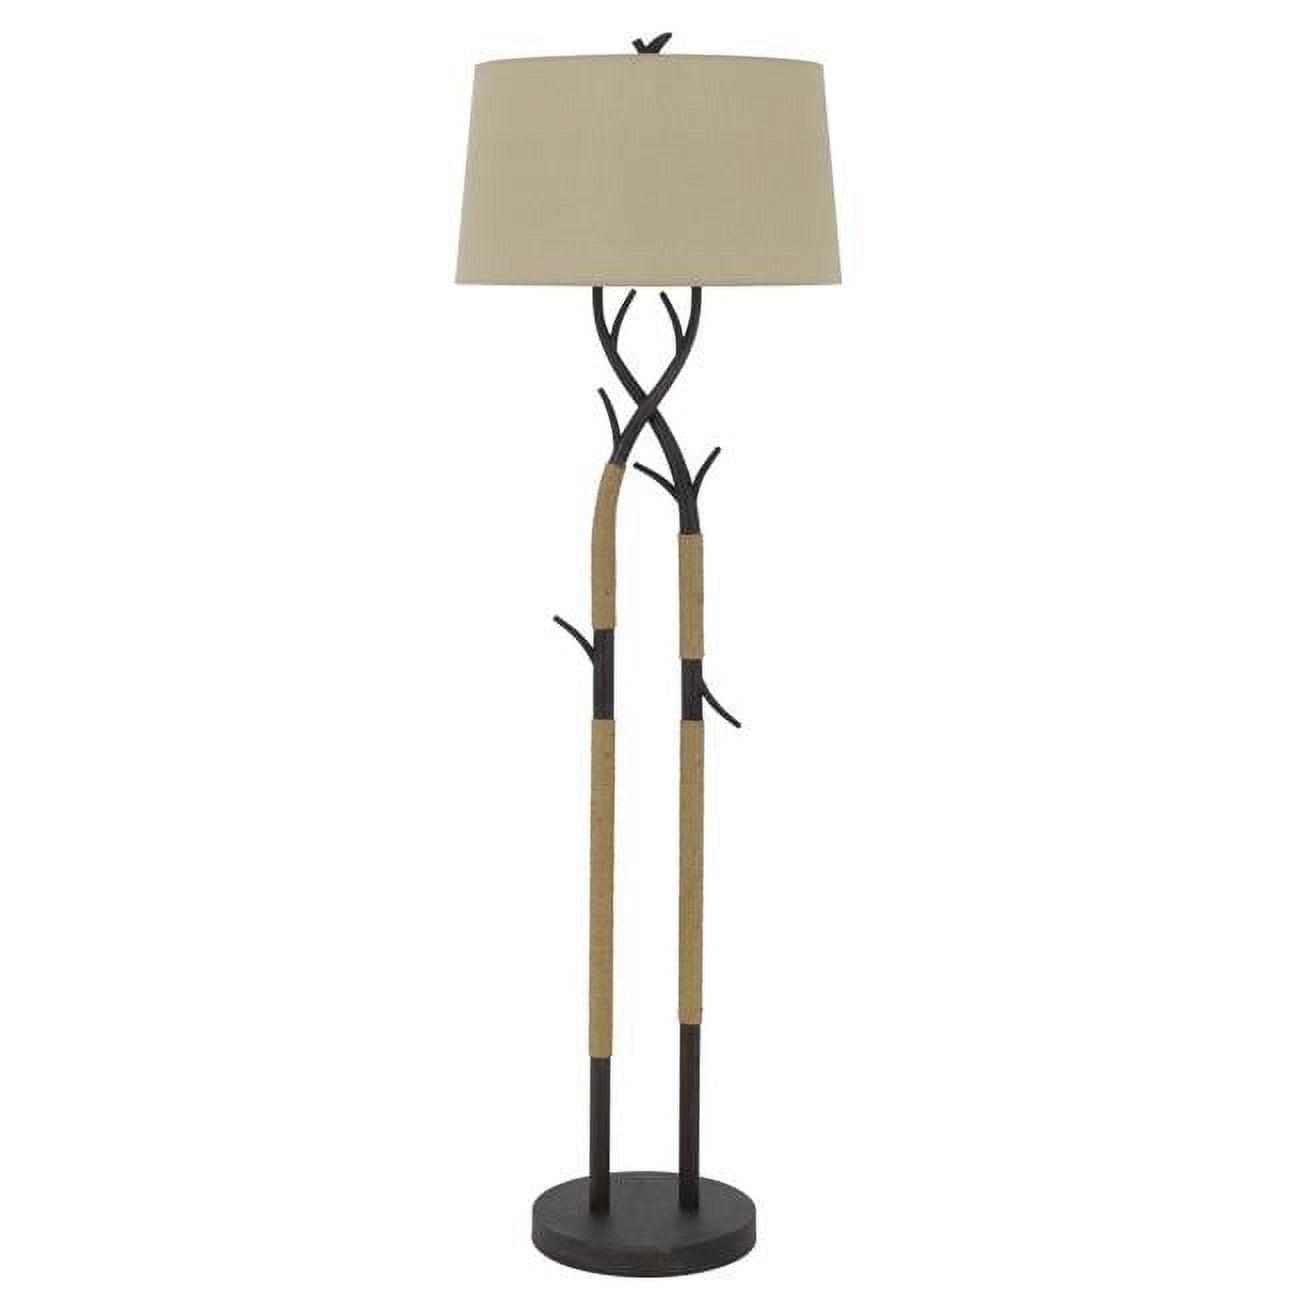 Intersected Black Tree Branch Metal Floor Lamp with Rope Accent